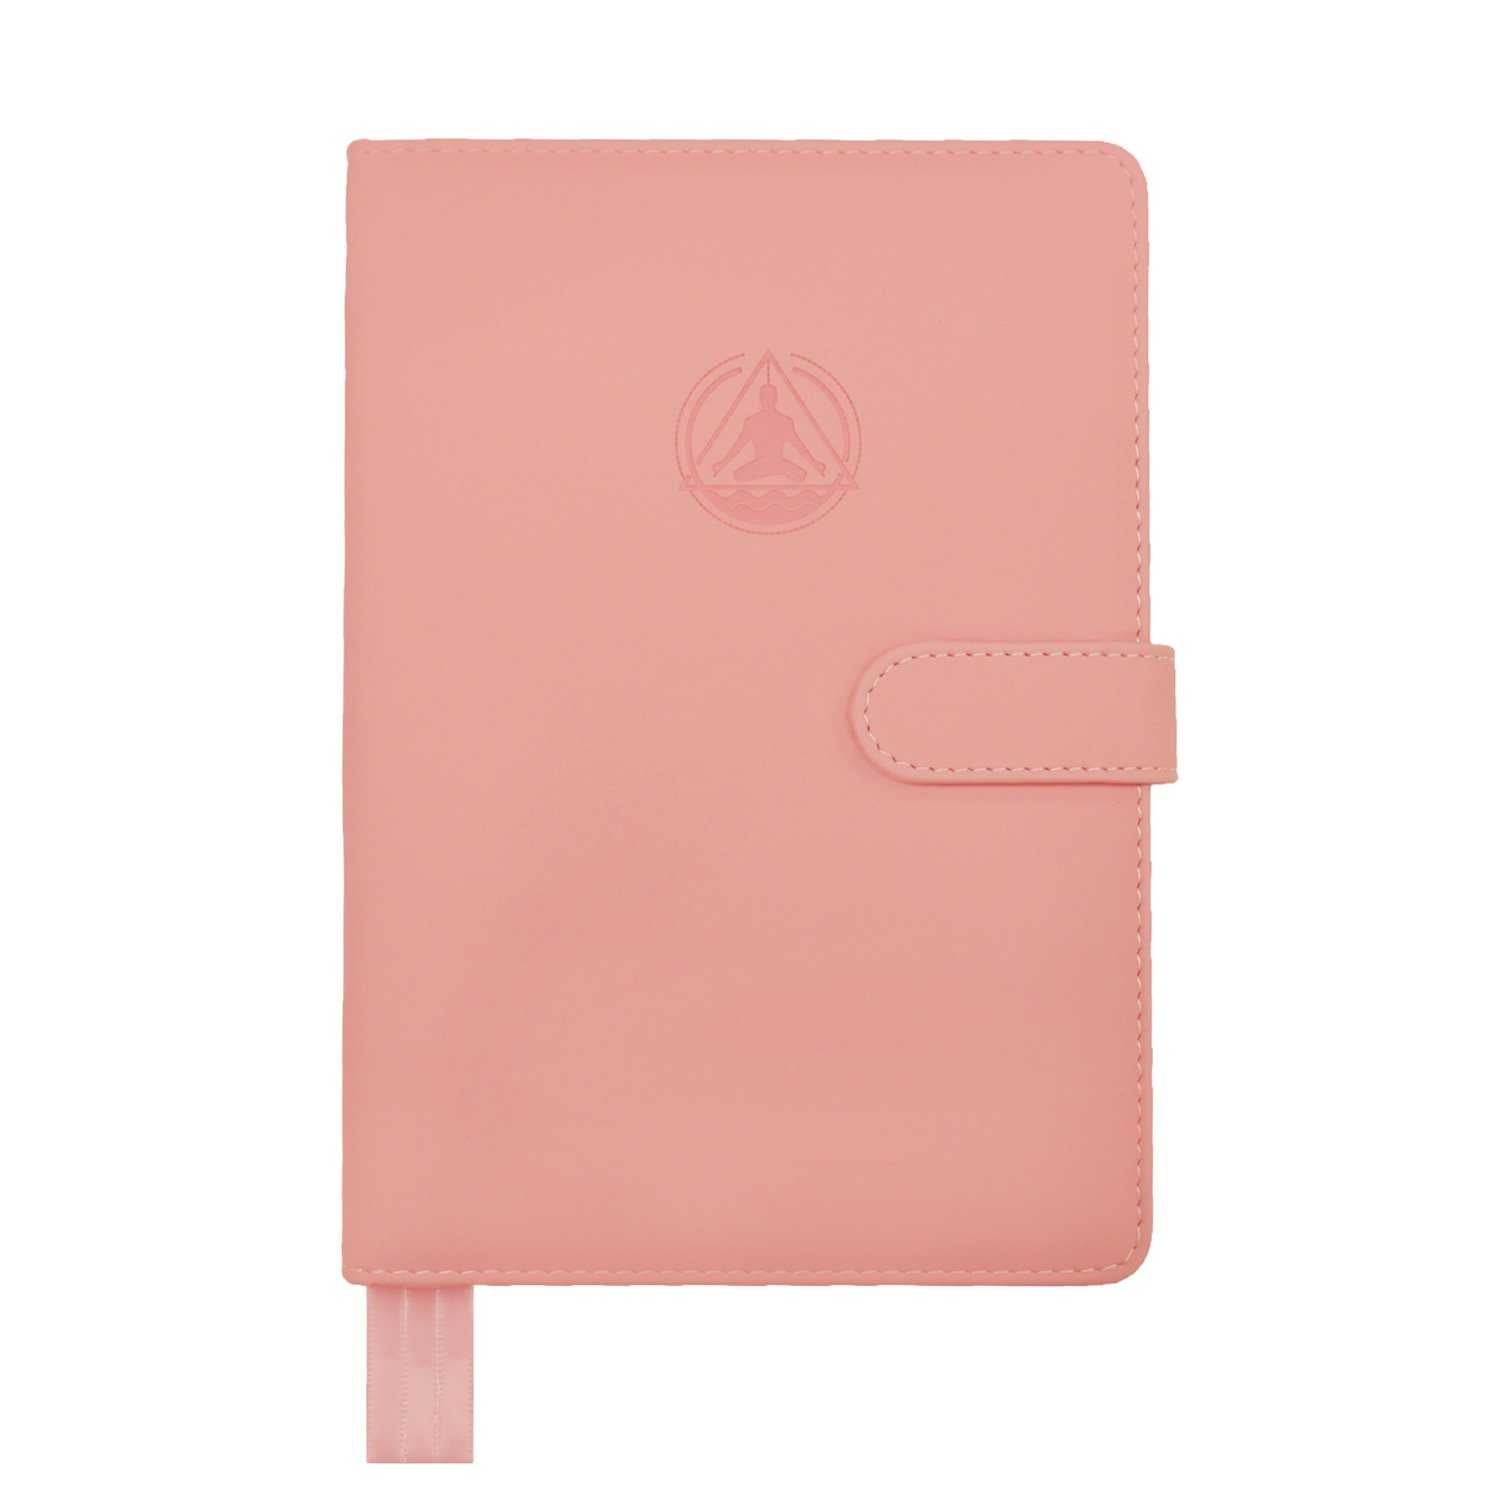 High Quality Paper Open-Flat Lined Dotted Notebook, Journal Notebook